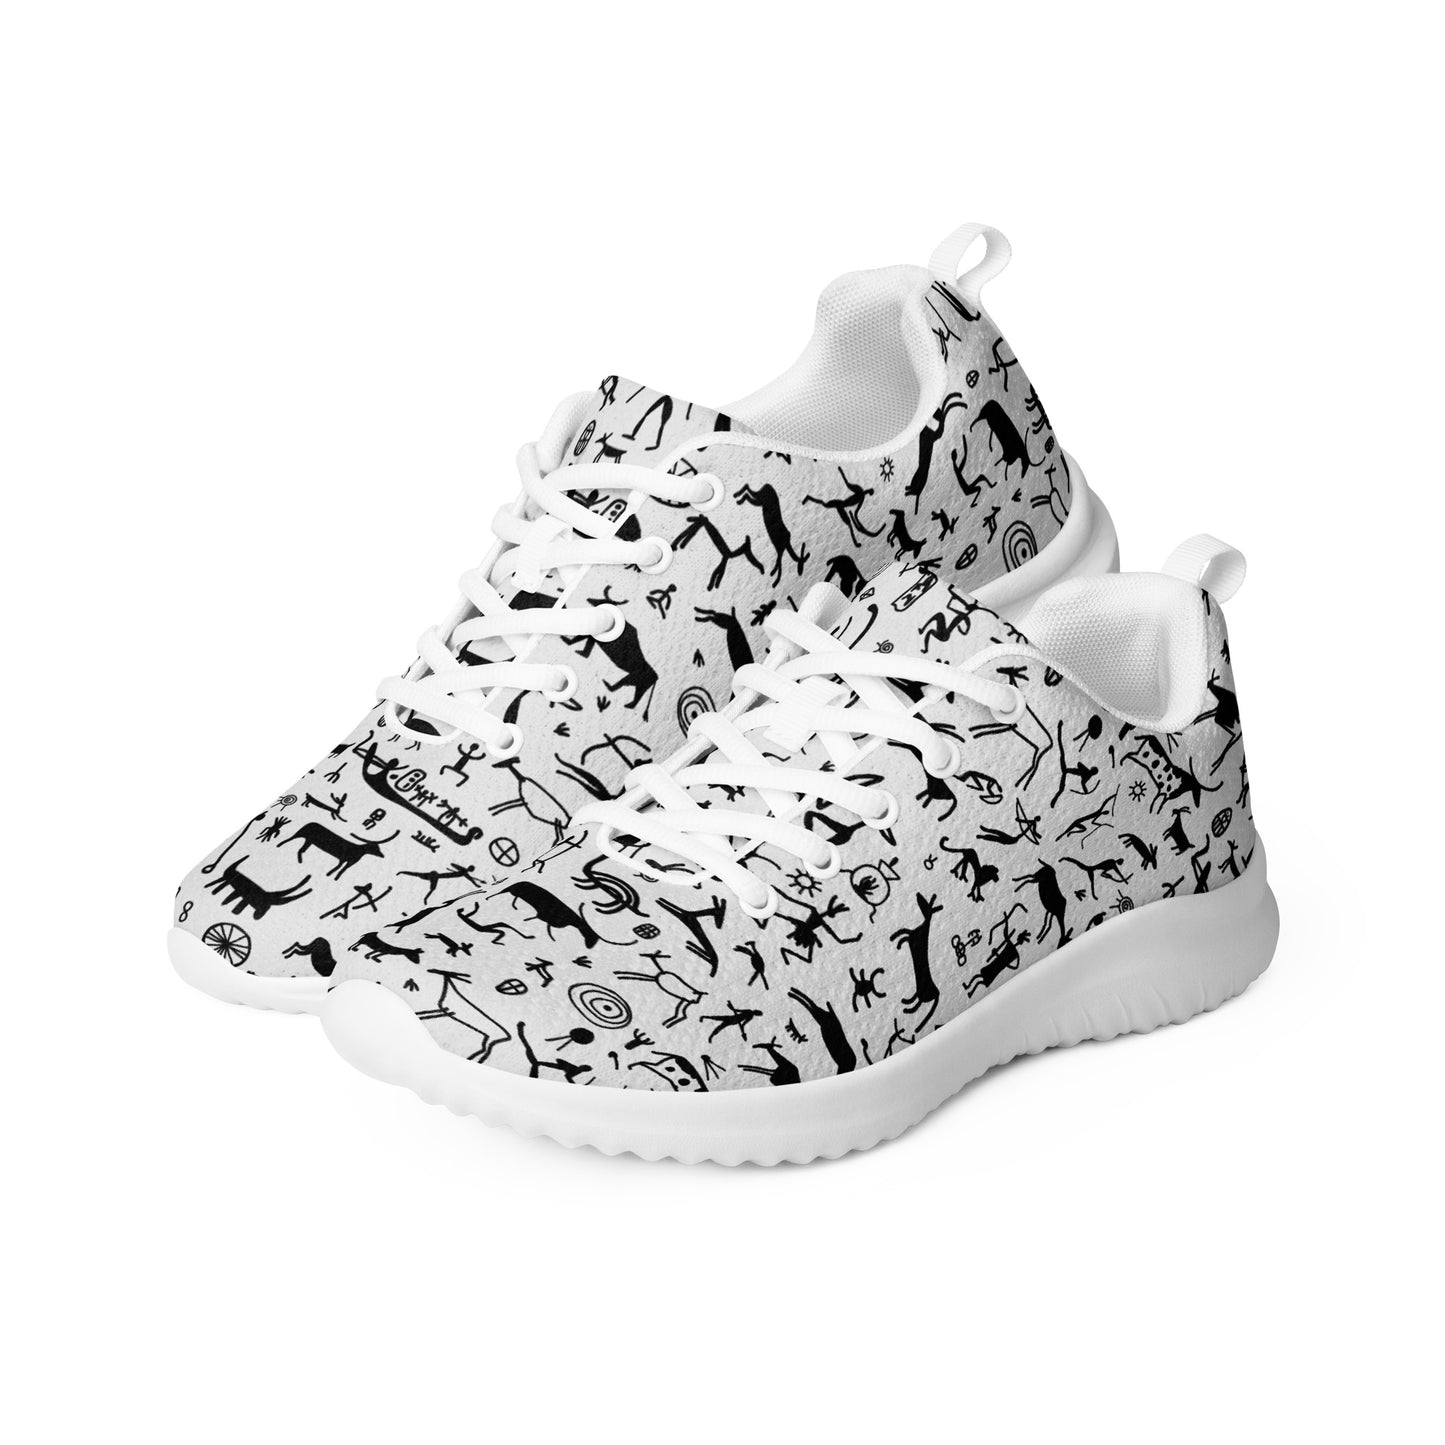 Women's Stylish Athletic Shoes with Designer Cave Drawing Print kudrylab